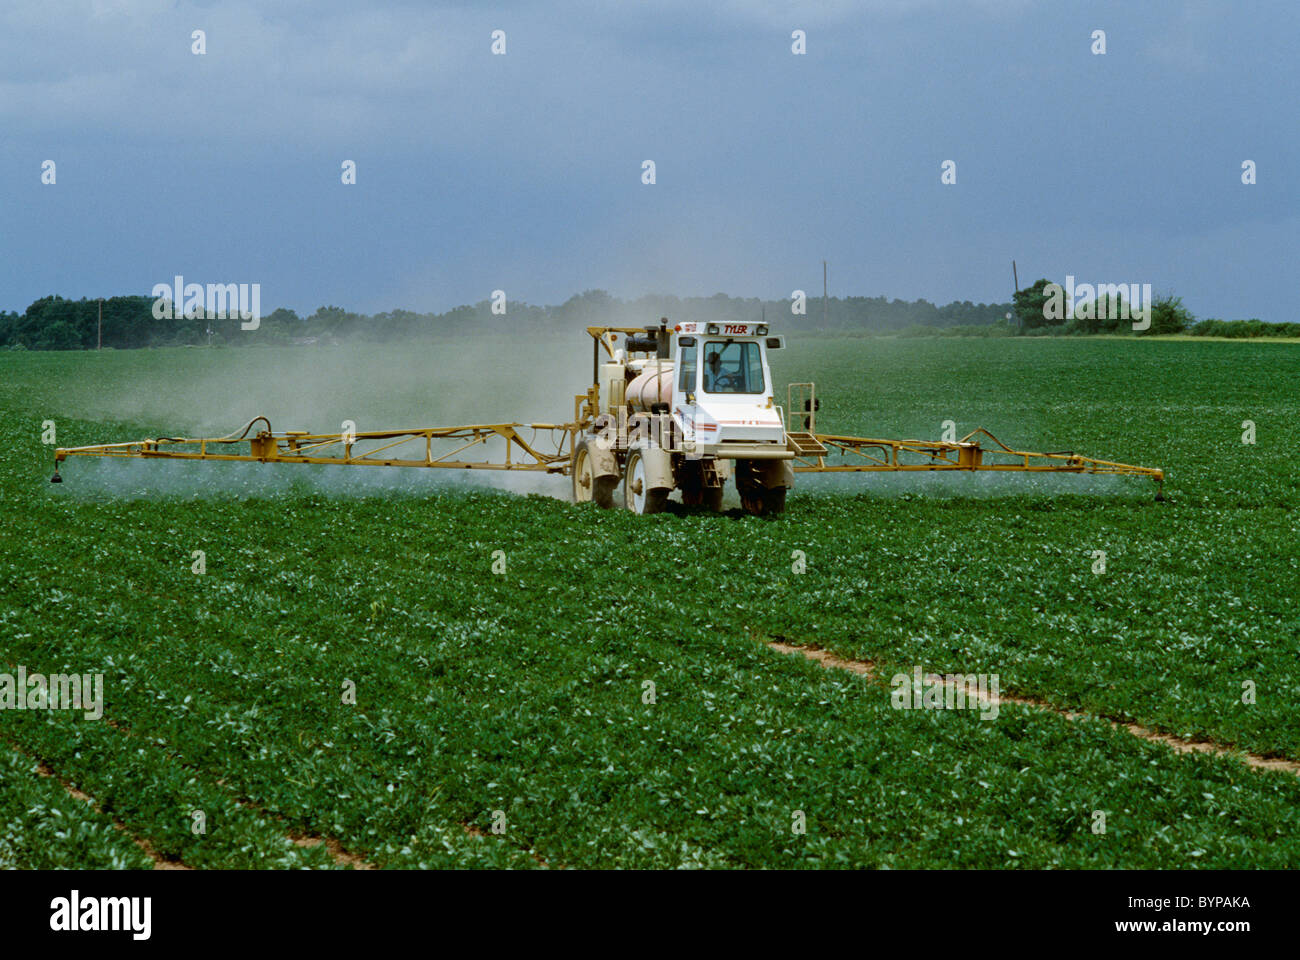 Agriculture - Chemical application of fungicide on mid growth peanuts / Alabama, USA. Stock Photo